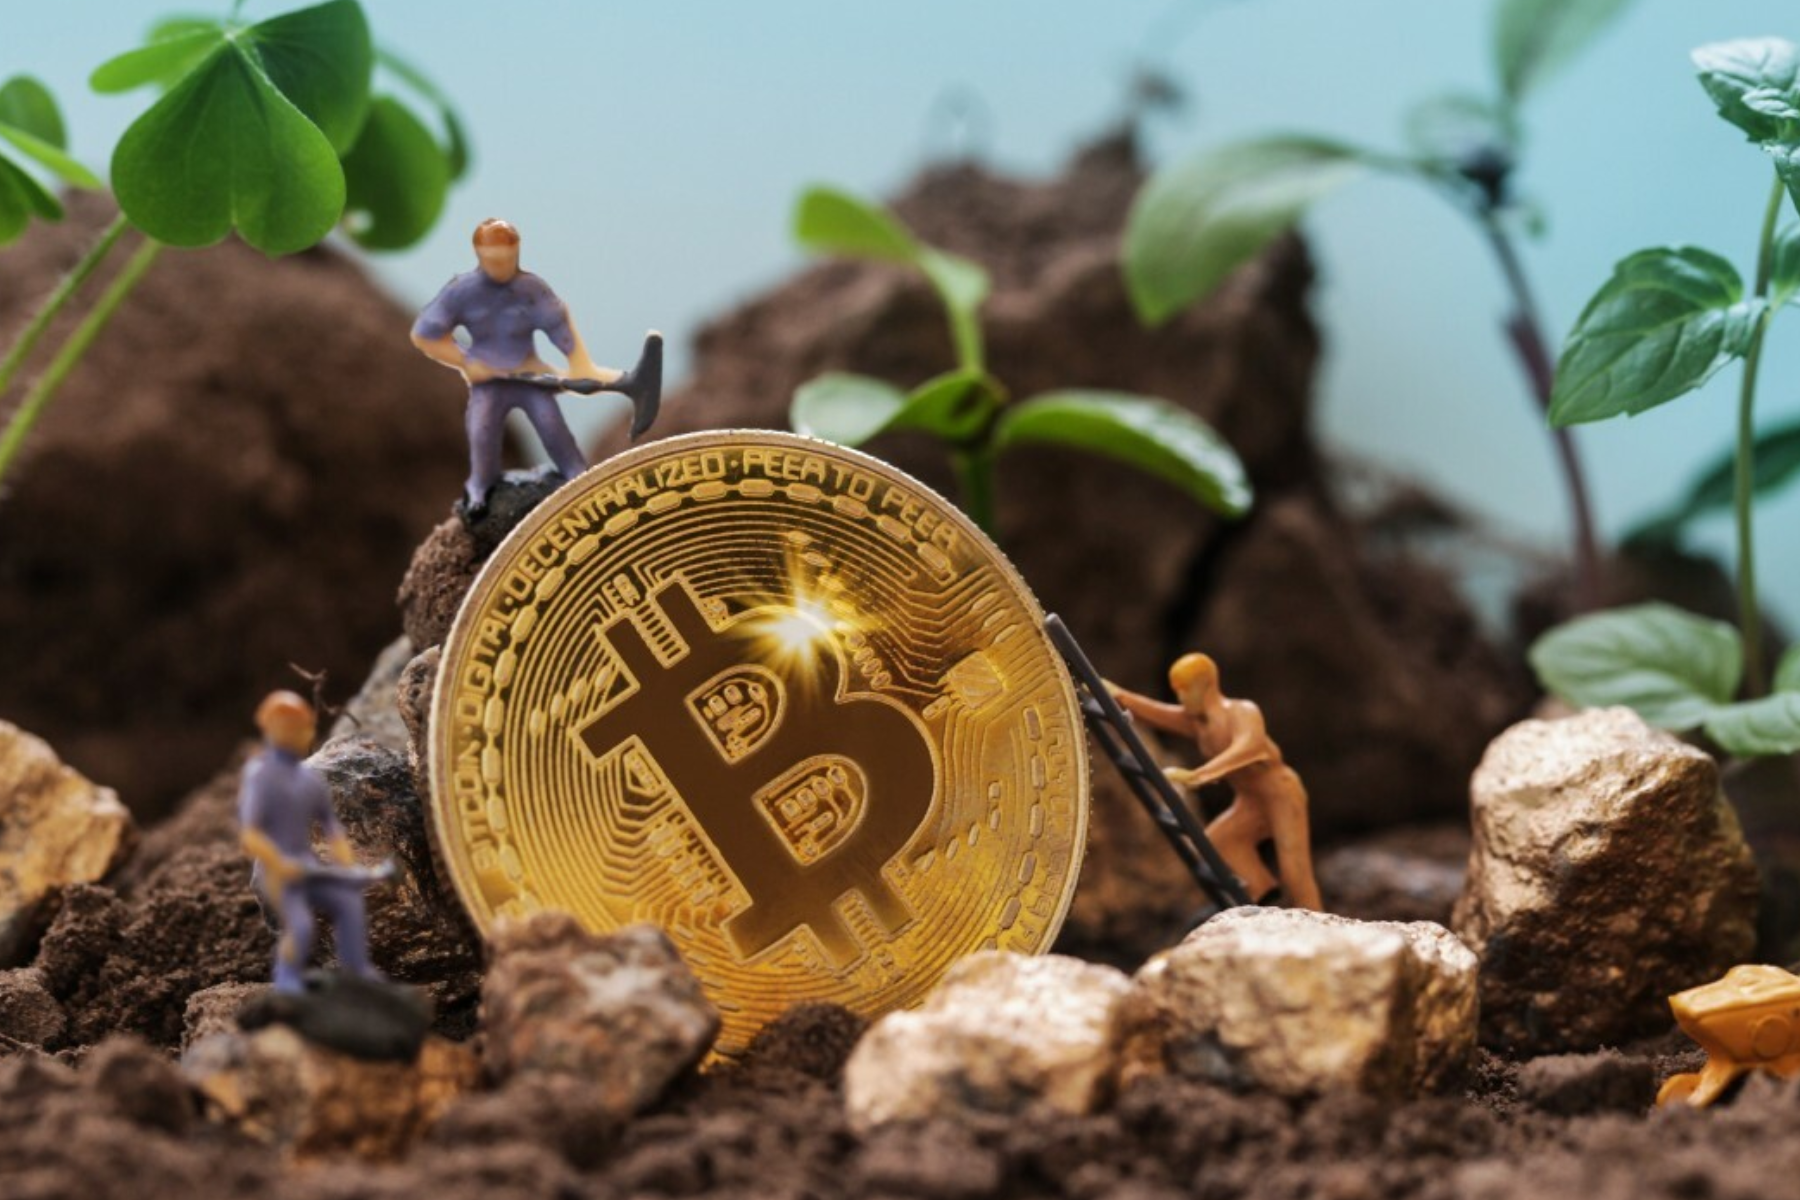 A Bitcoin with small-scale miners